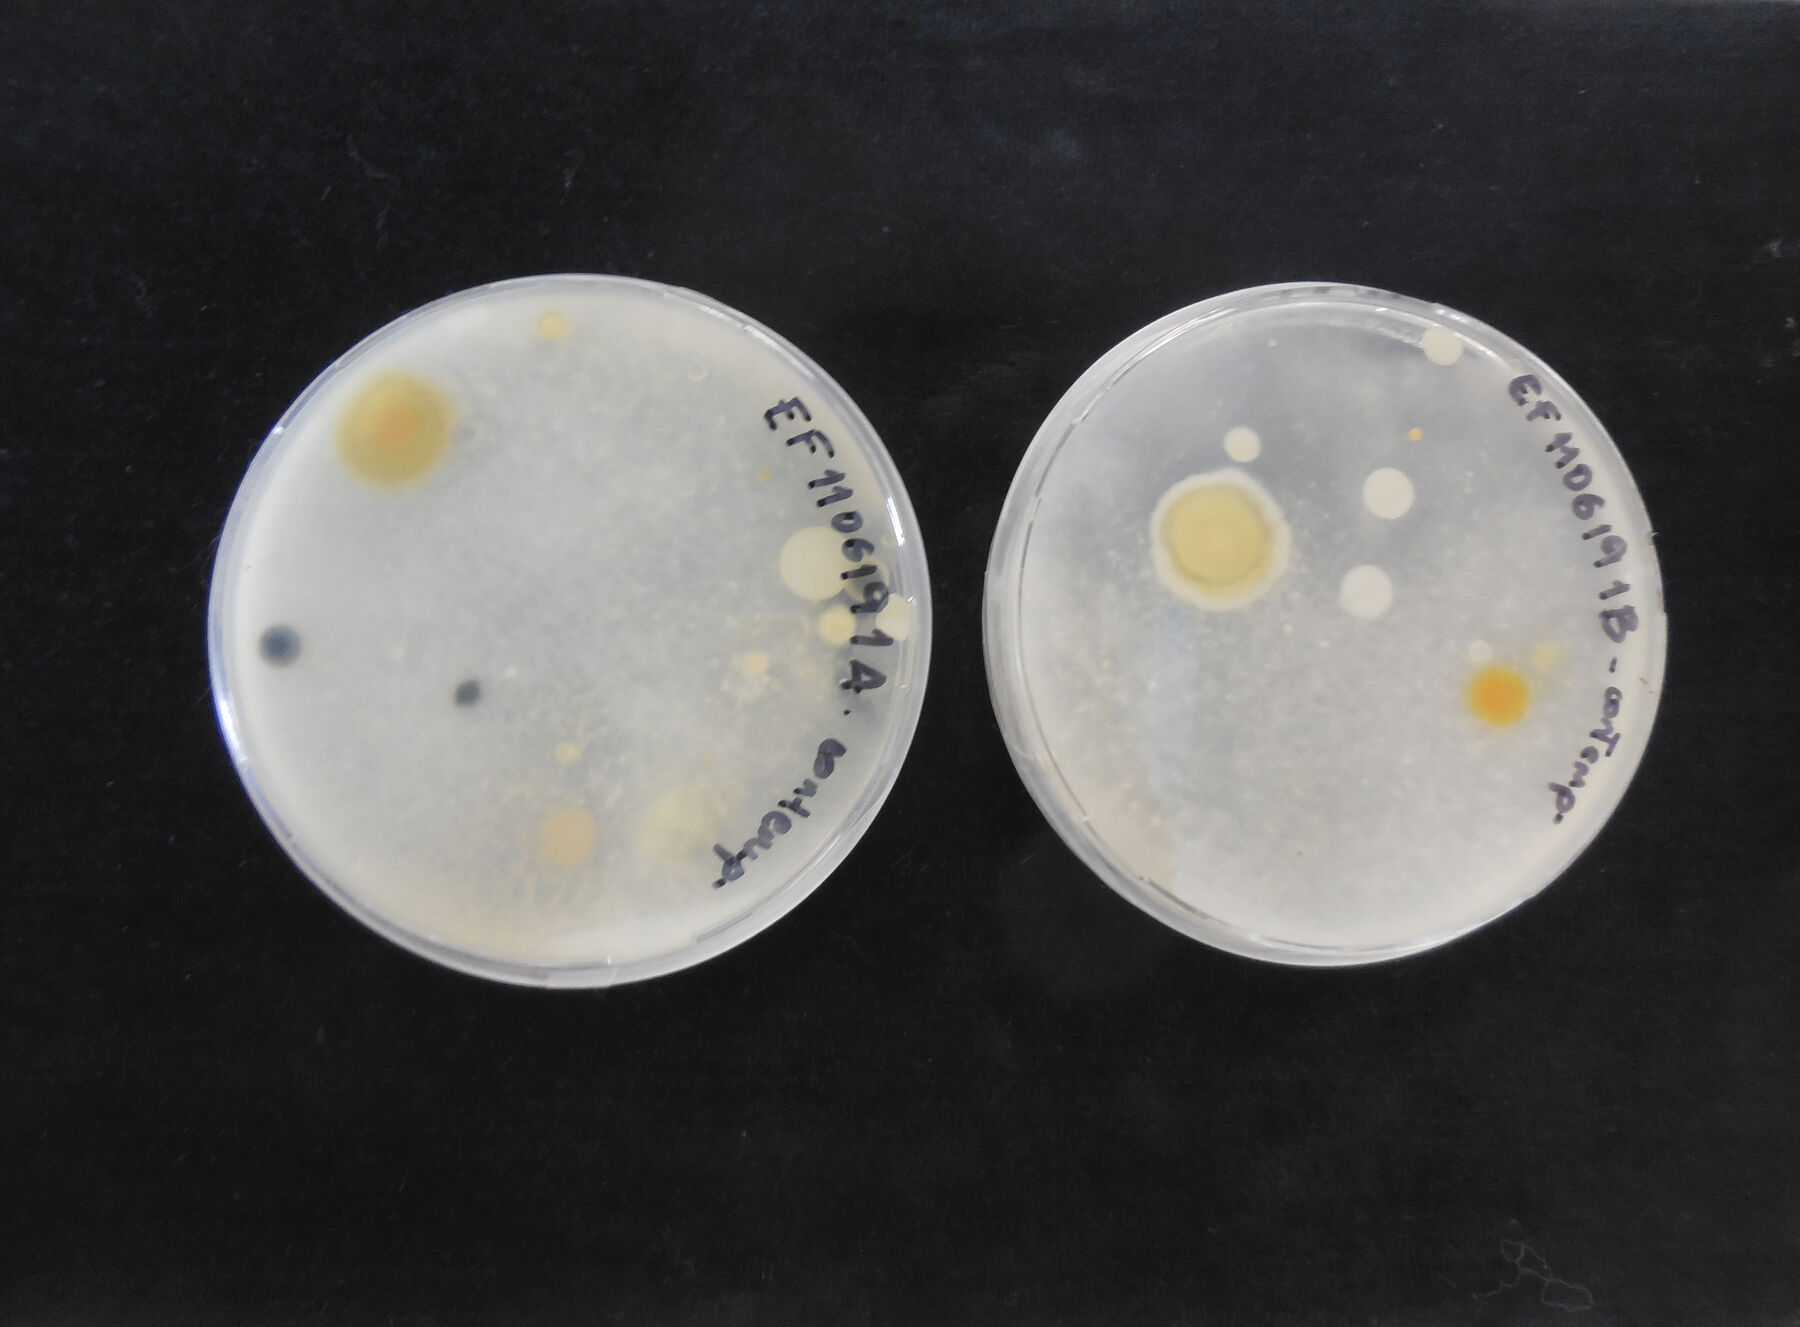 Two petri dishes with scattered yellow dots that were from evironmental samples each of which are labeled